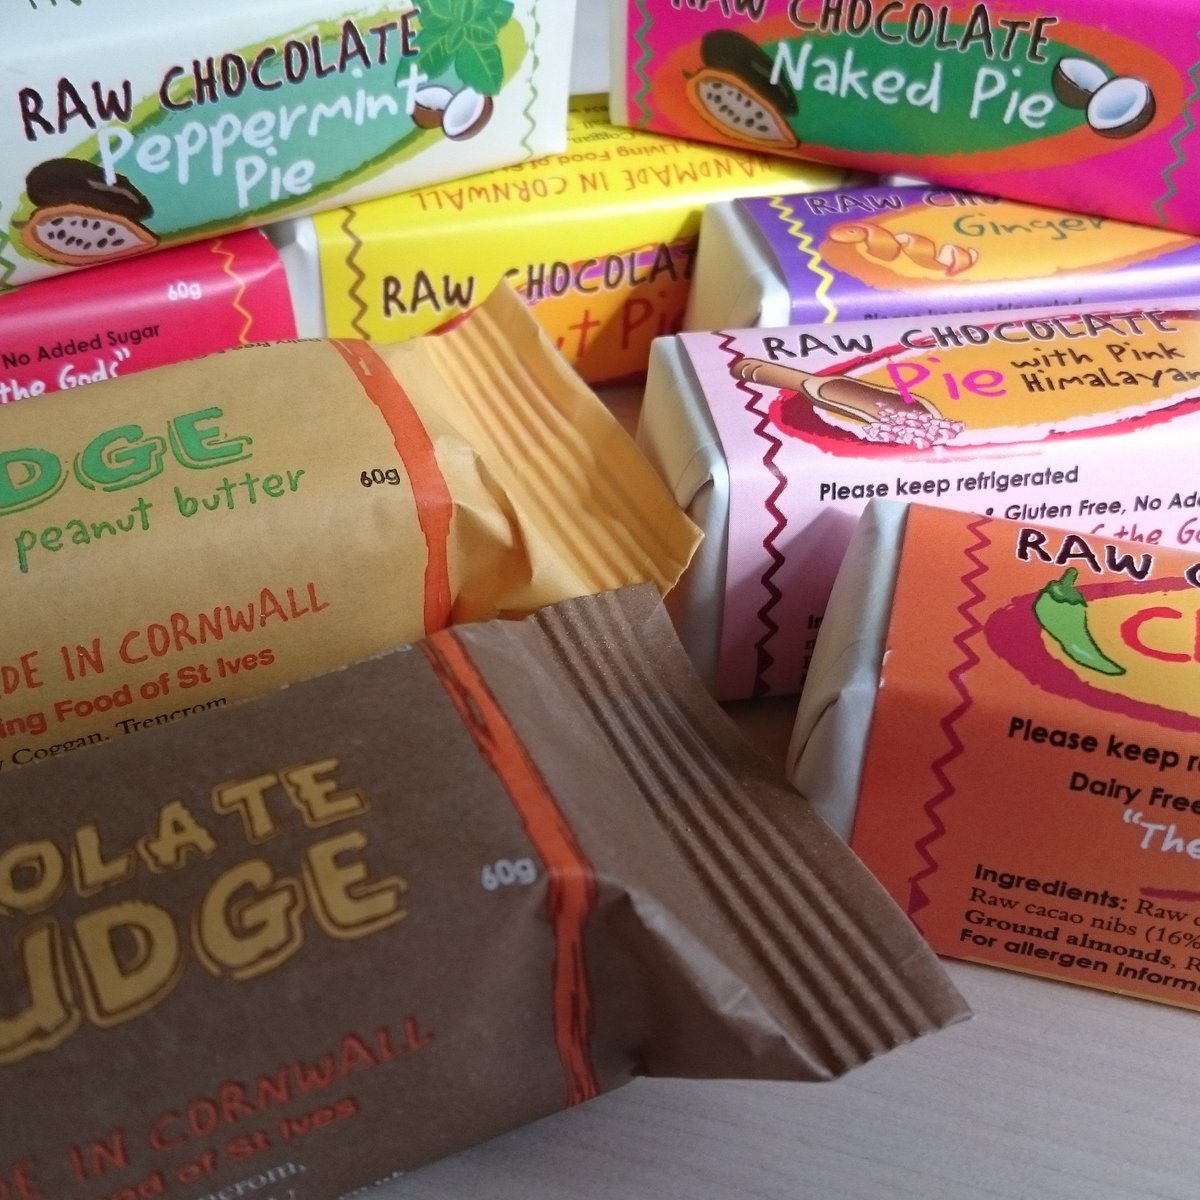 Did you know that raw chocolate is high in antioxidants? Raw Chocolate Pie bars are raw, gluten free and with no added sugar. And delicious! In our chiller now, £2.50 for the chocolate and £2.60 for the fudge. #vegan #reduceplastic #rawchocolate #haworth  @rawchocolatepie